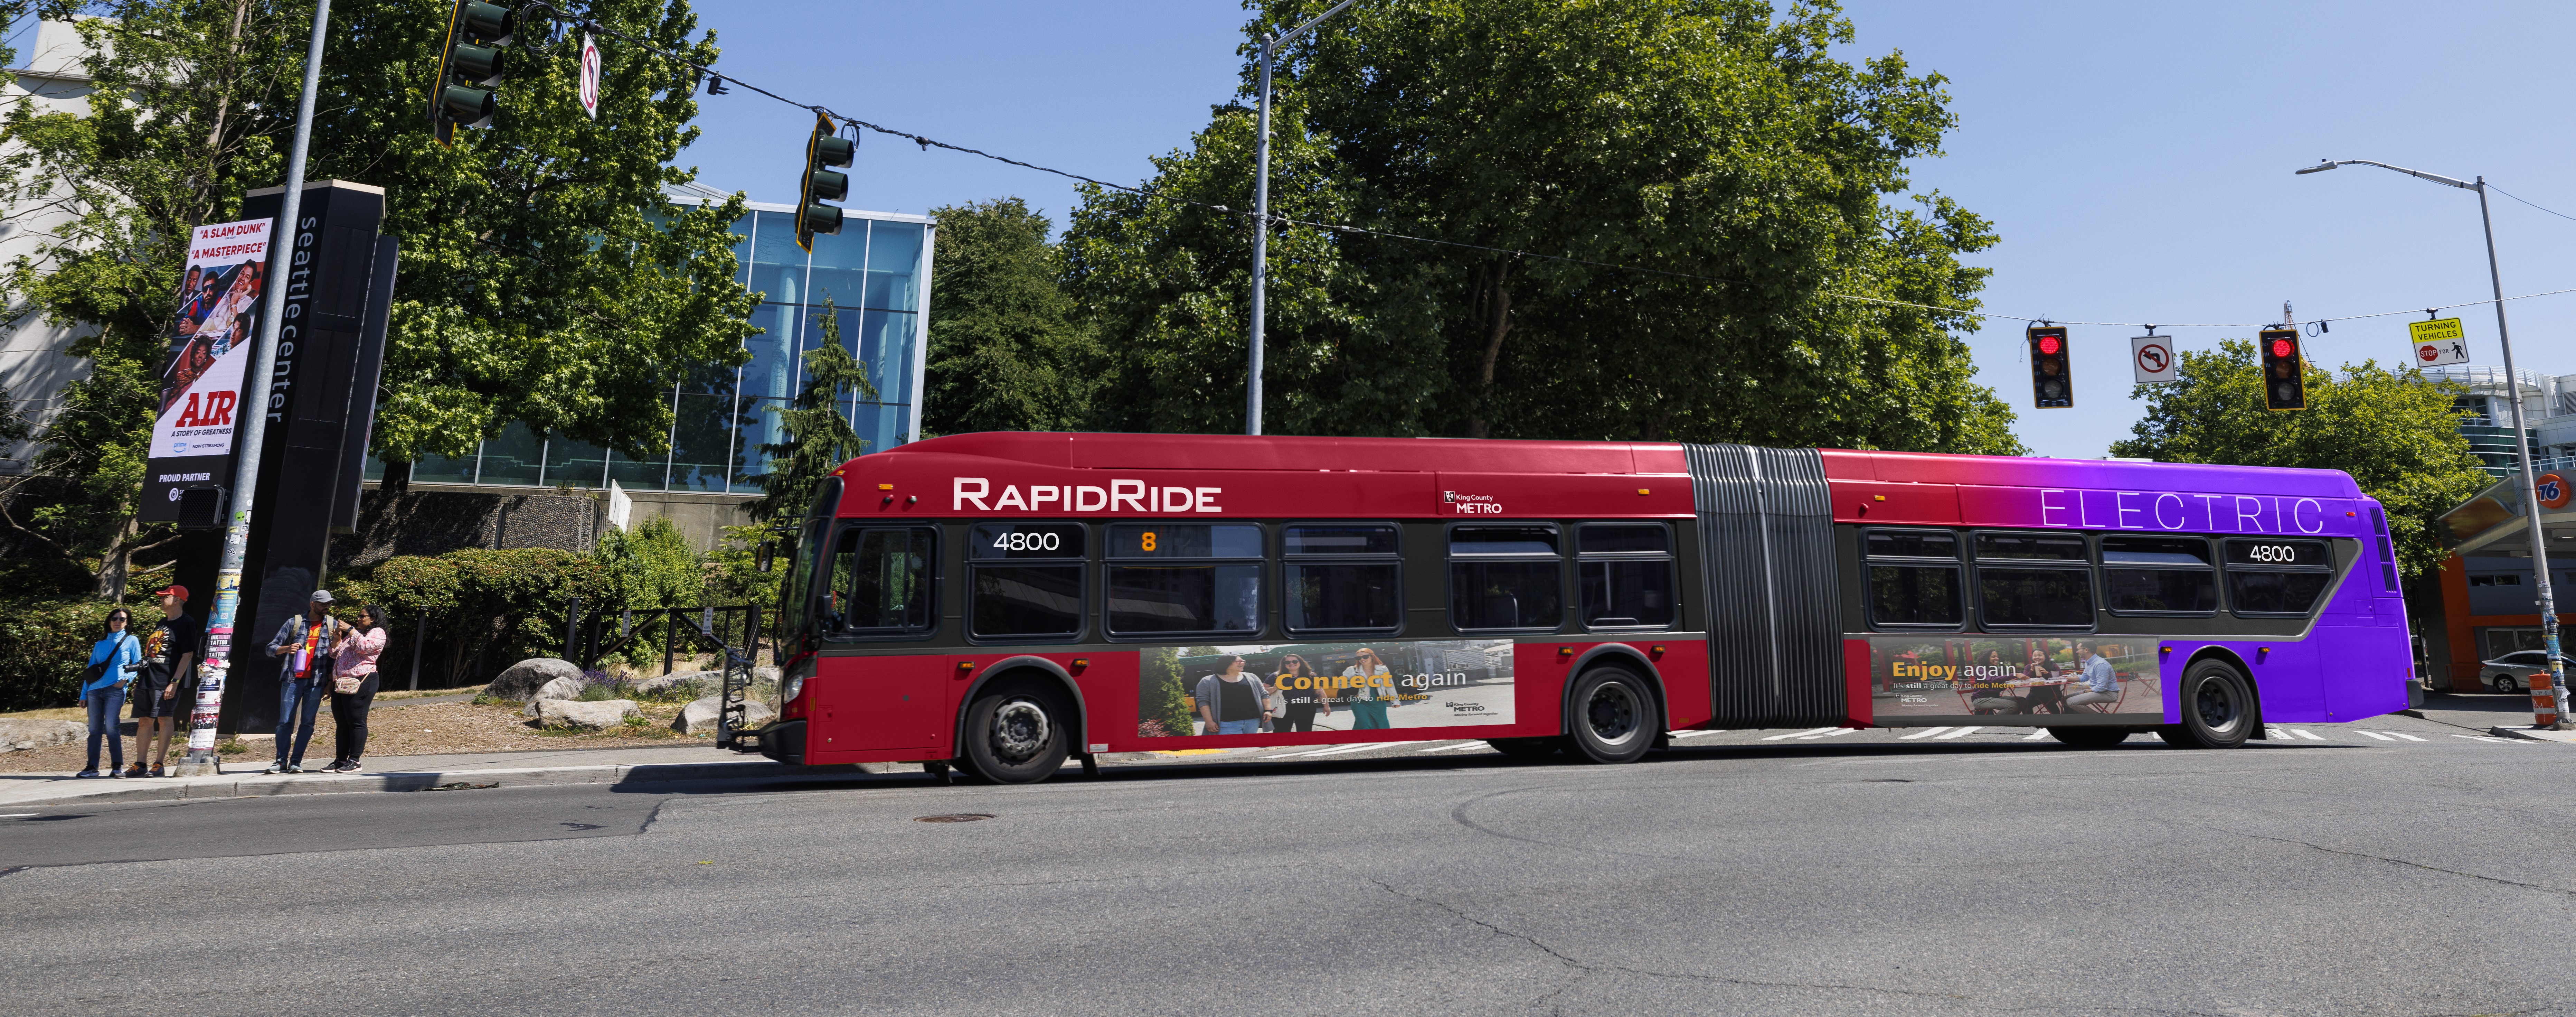 Rendering of a Metro RapidRide bus wrapped in the new red and purple design on tree-lines street against a blue sky